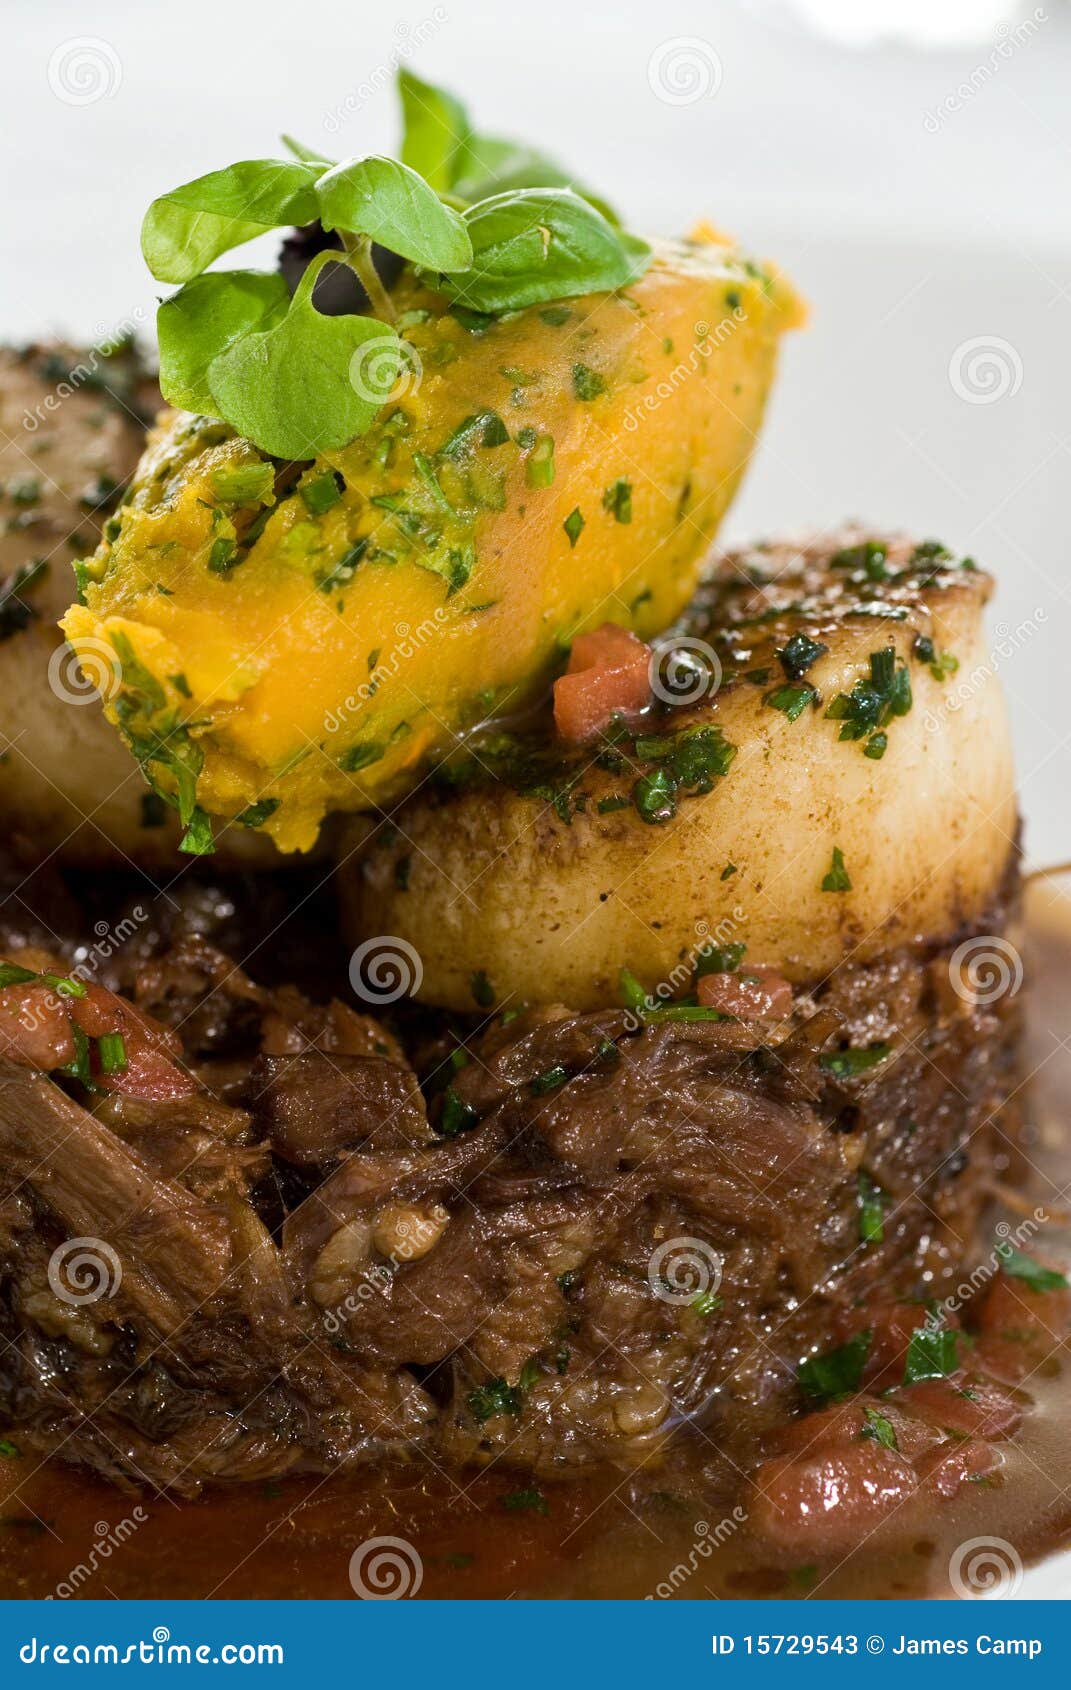 Braised oxtail stew stock image. Image of scallop, brown - 15729543